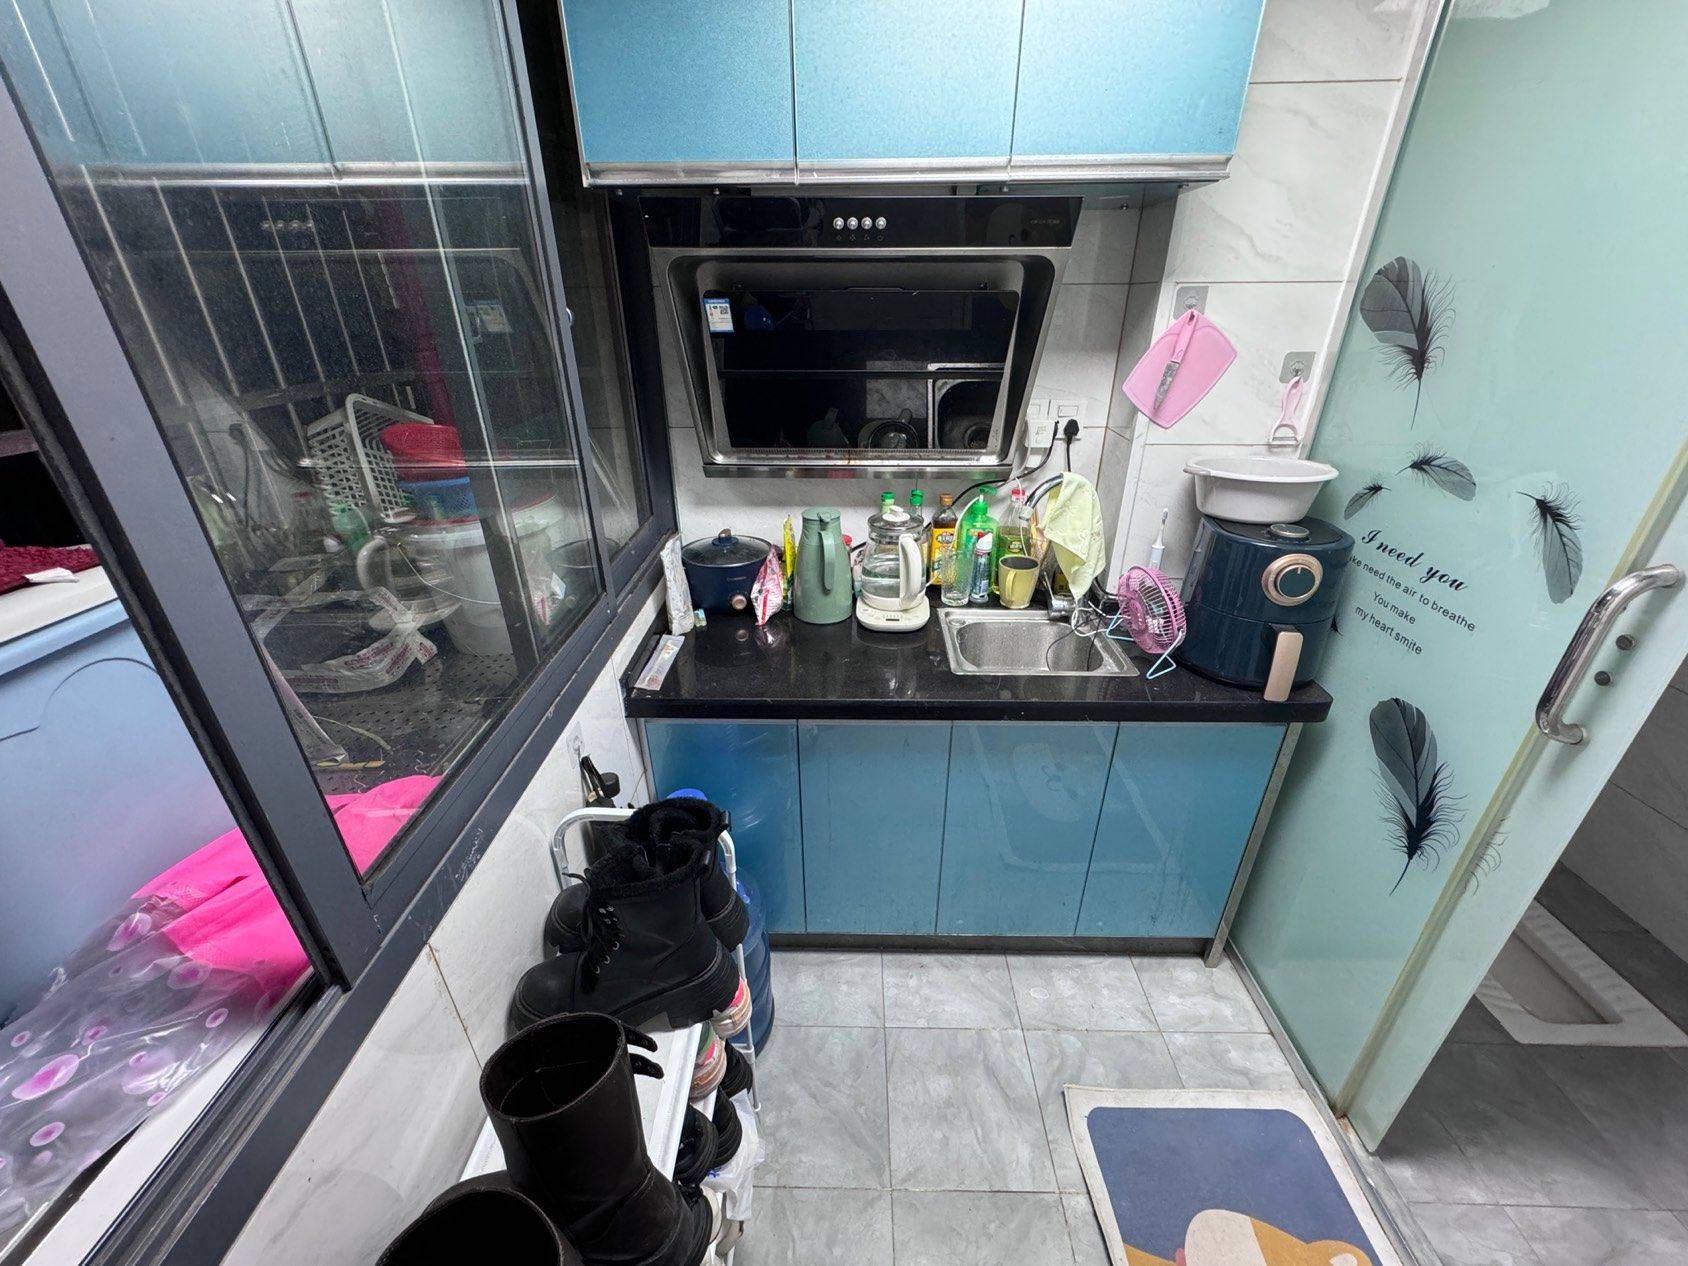 Changsha-Wangcheng-Cozy Home,Clean&Comfy,No Gender Limit,Chilled